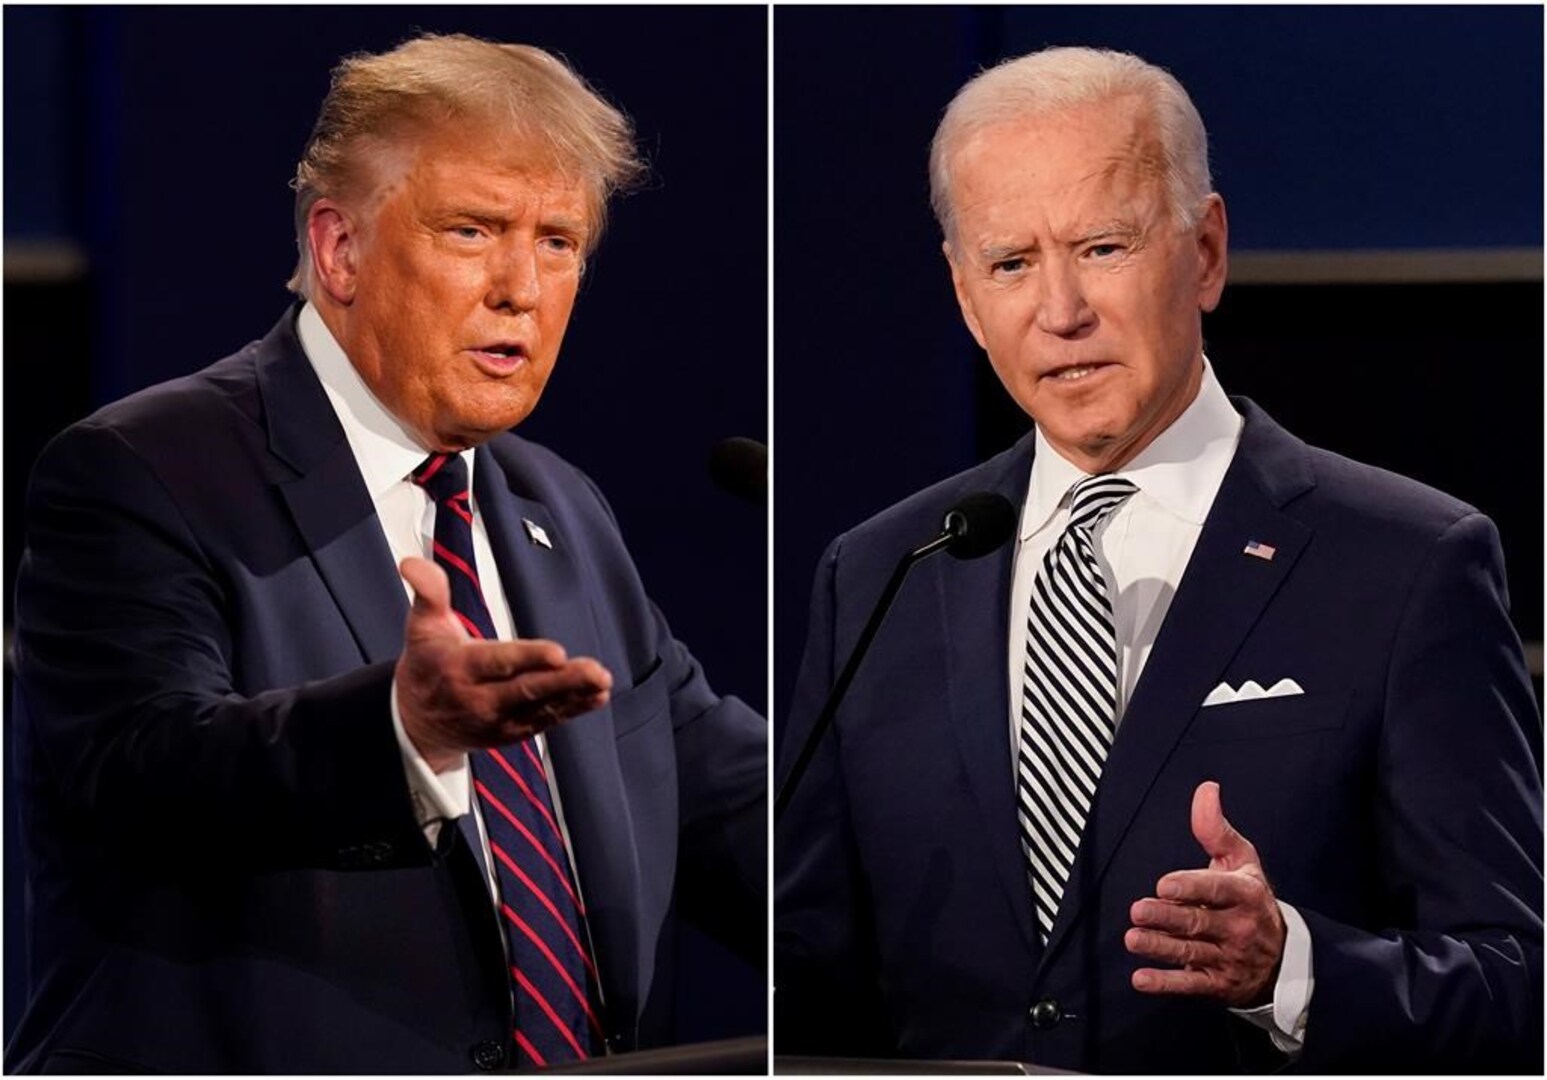 Biden and Trump to face new debate rules